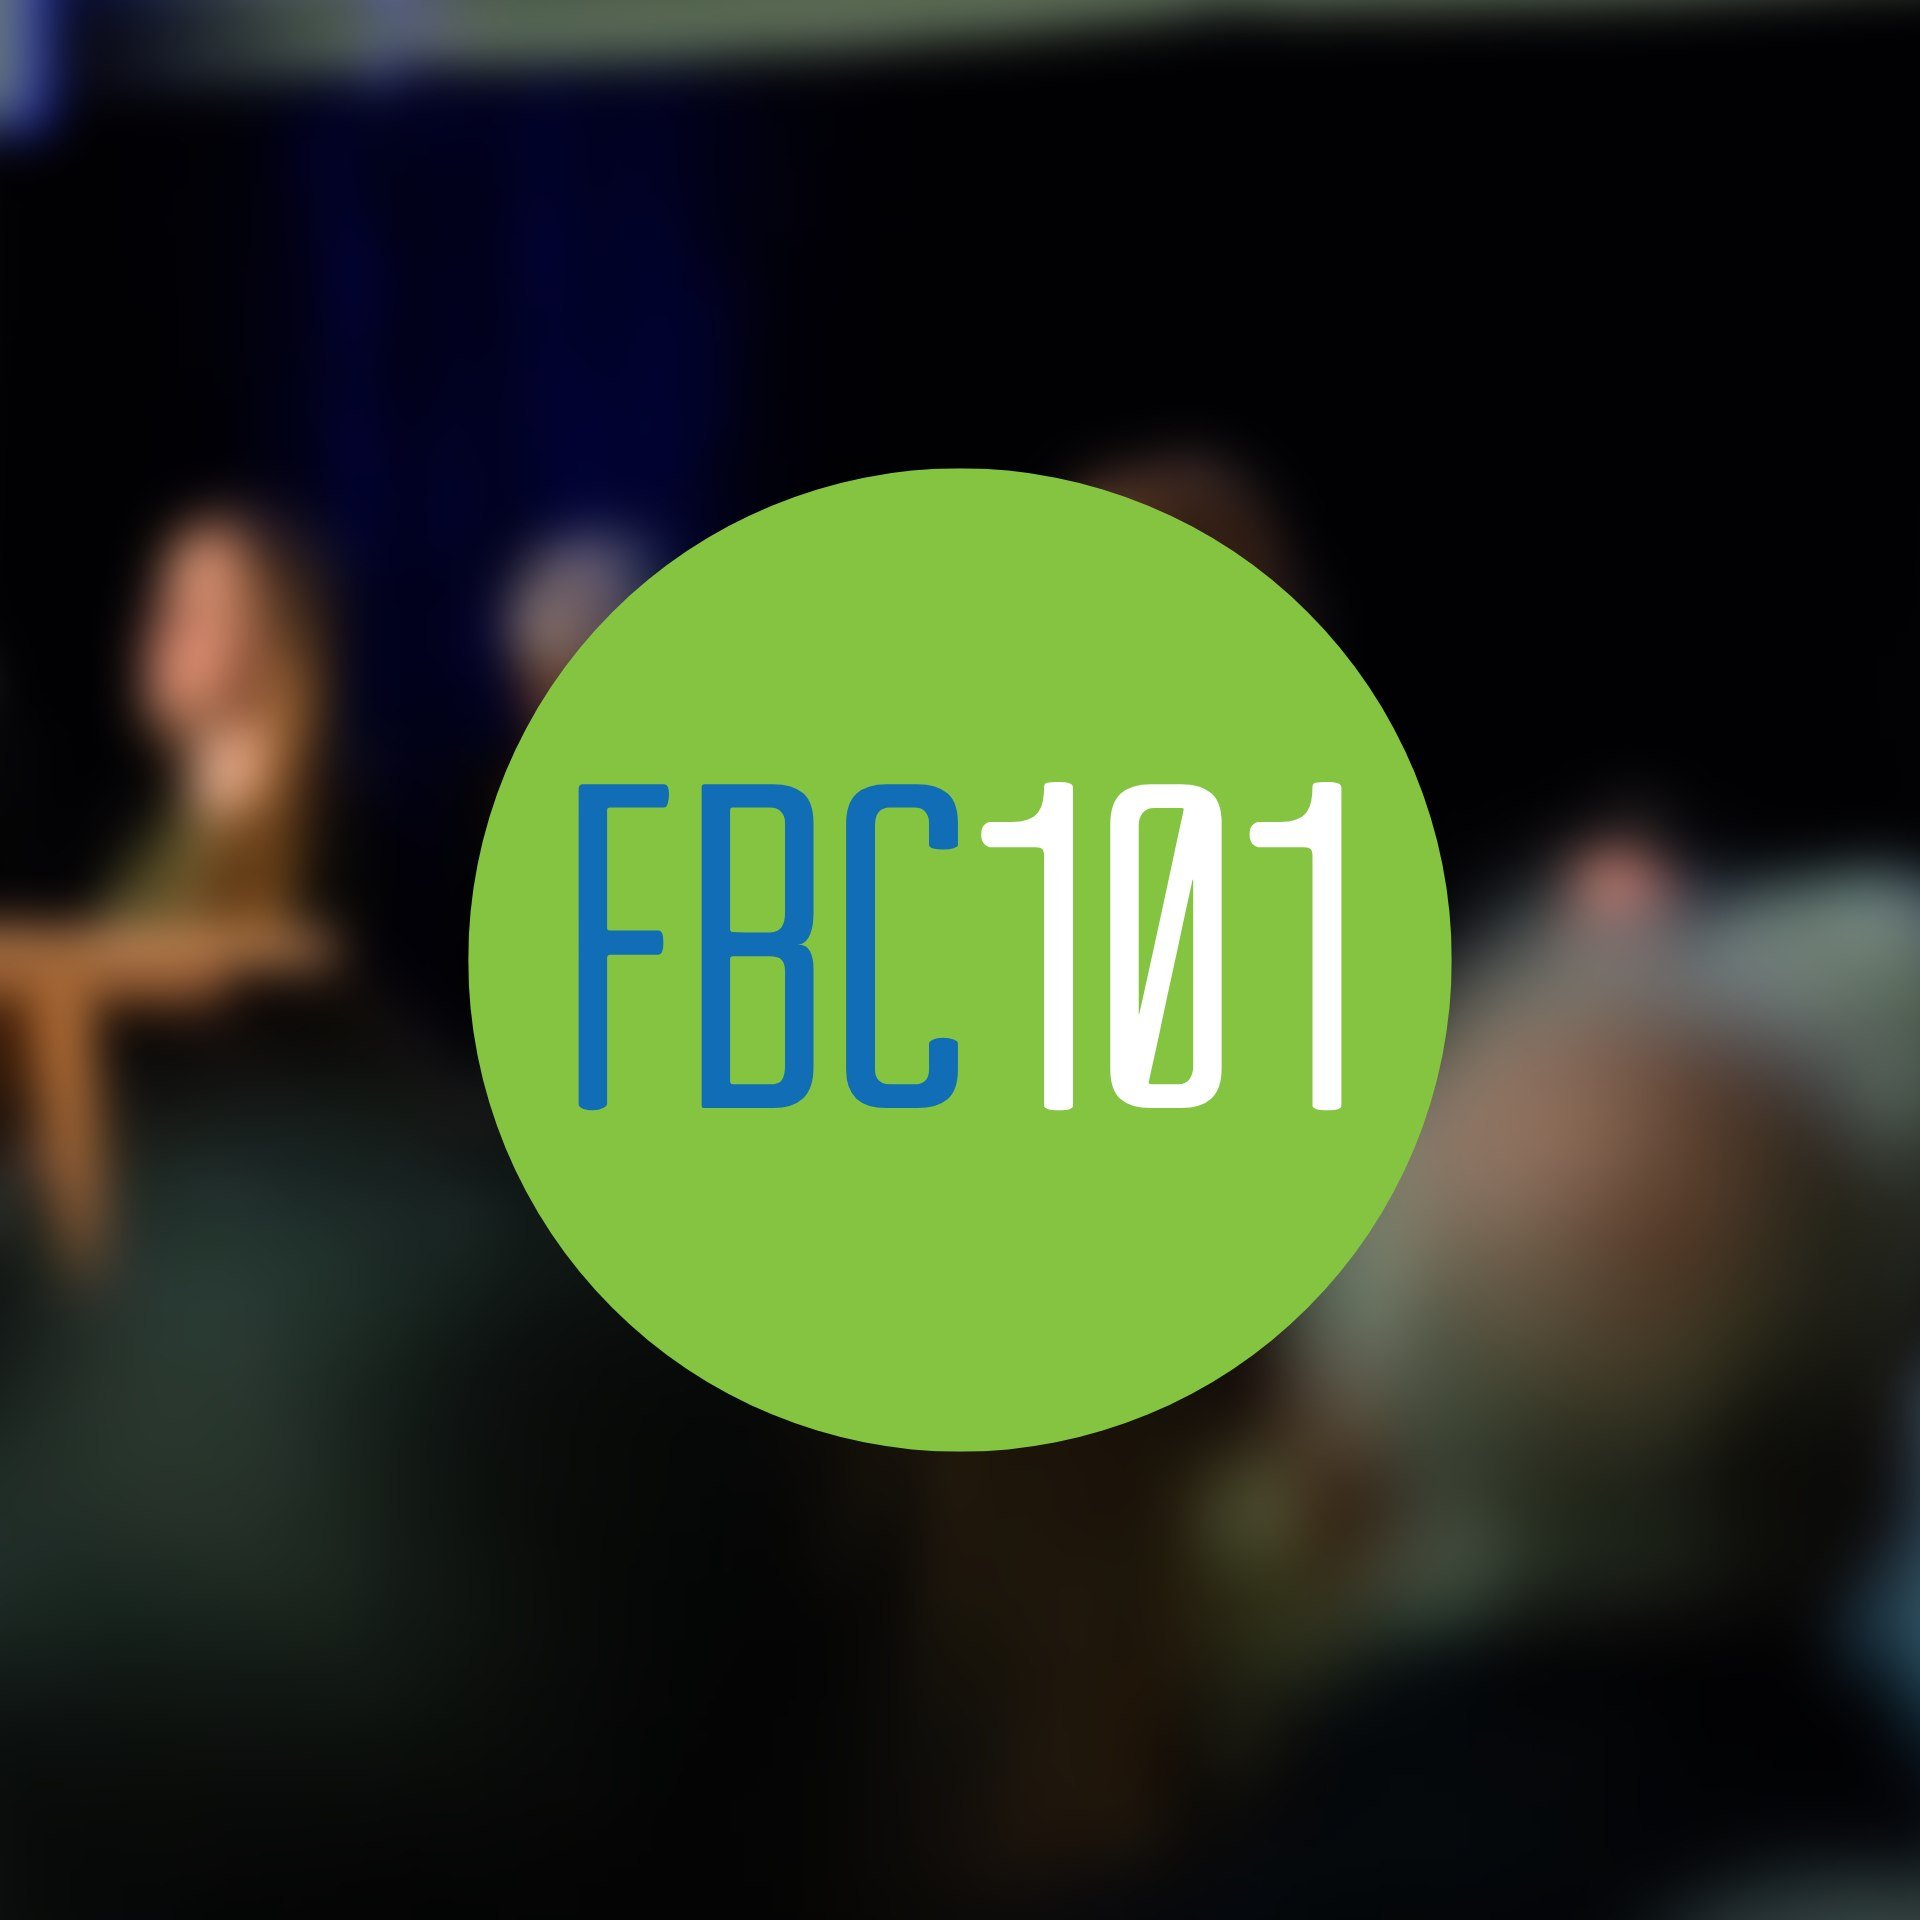 New to FBC? Want to know more about who we are as a church? Come join us for lunch on May 26th!

We'll be gathering after our morning service for lunch followed by our FBC 101 course where we'll cover our history, vision, values and beliefs. Register